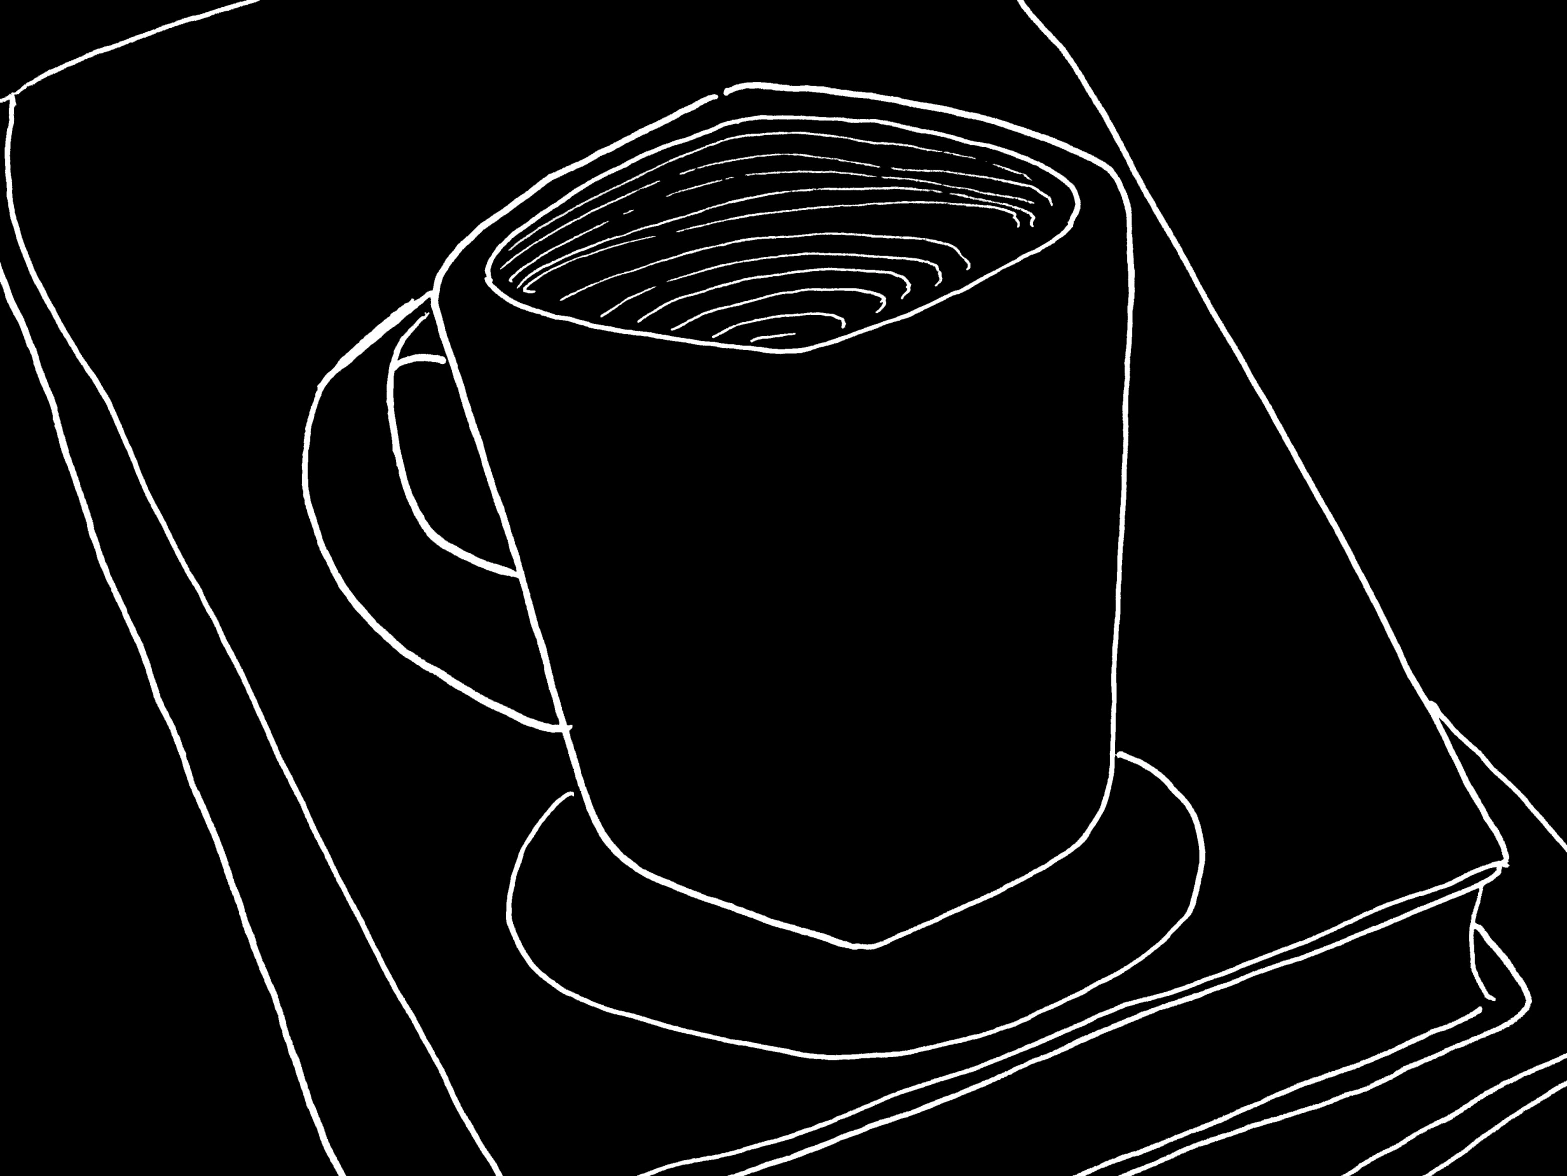 white line drawing on black background of a mug on top of some books